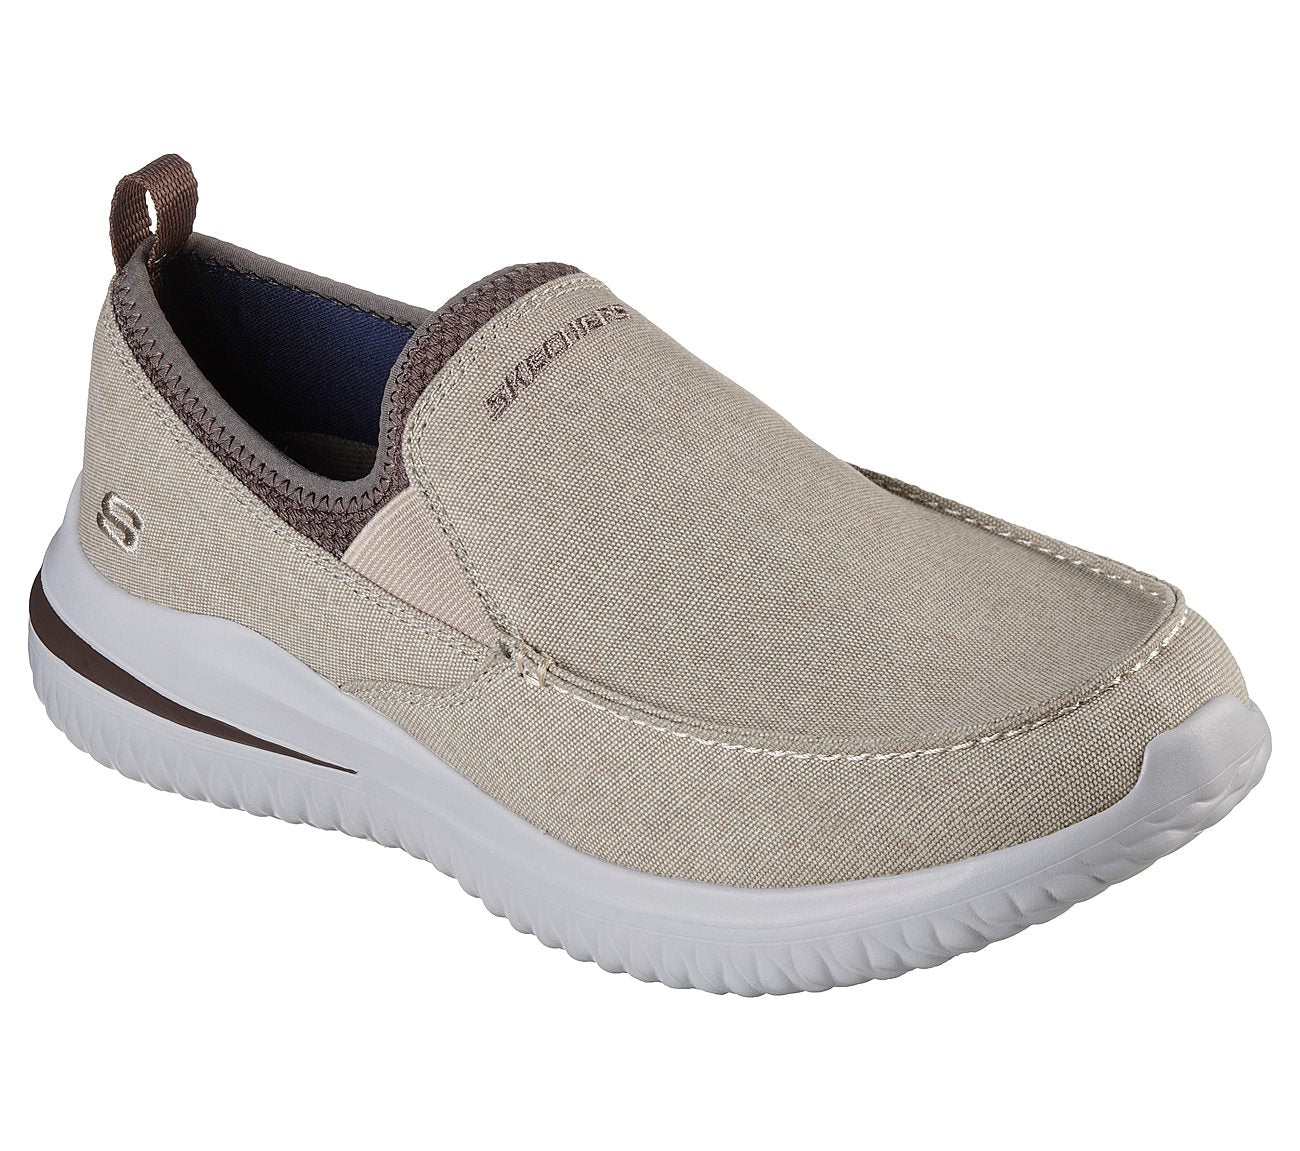 Skechers - Delson 3.0 Chadwick Loafer - Taupe